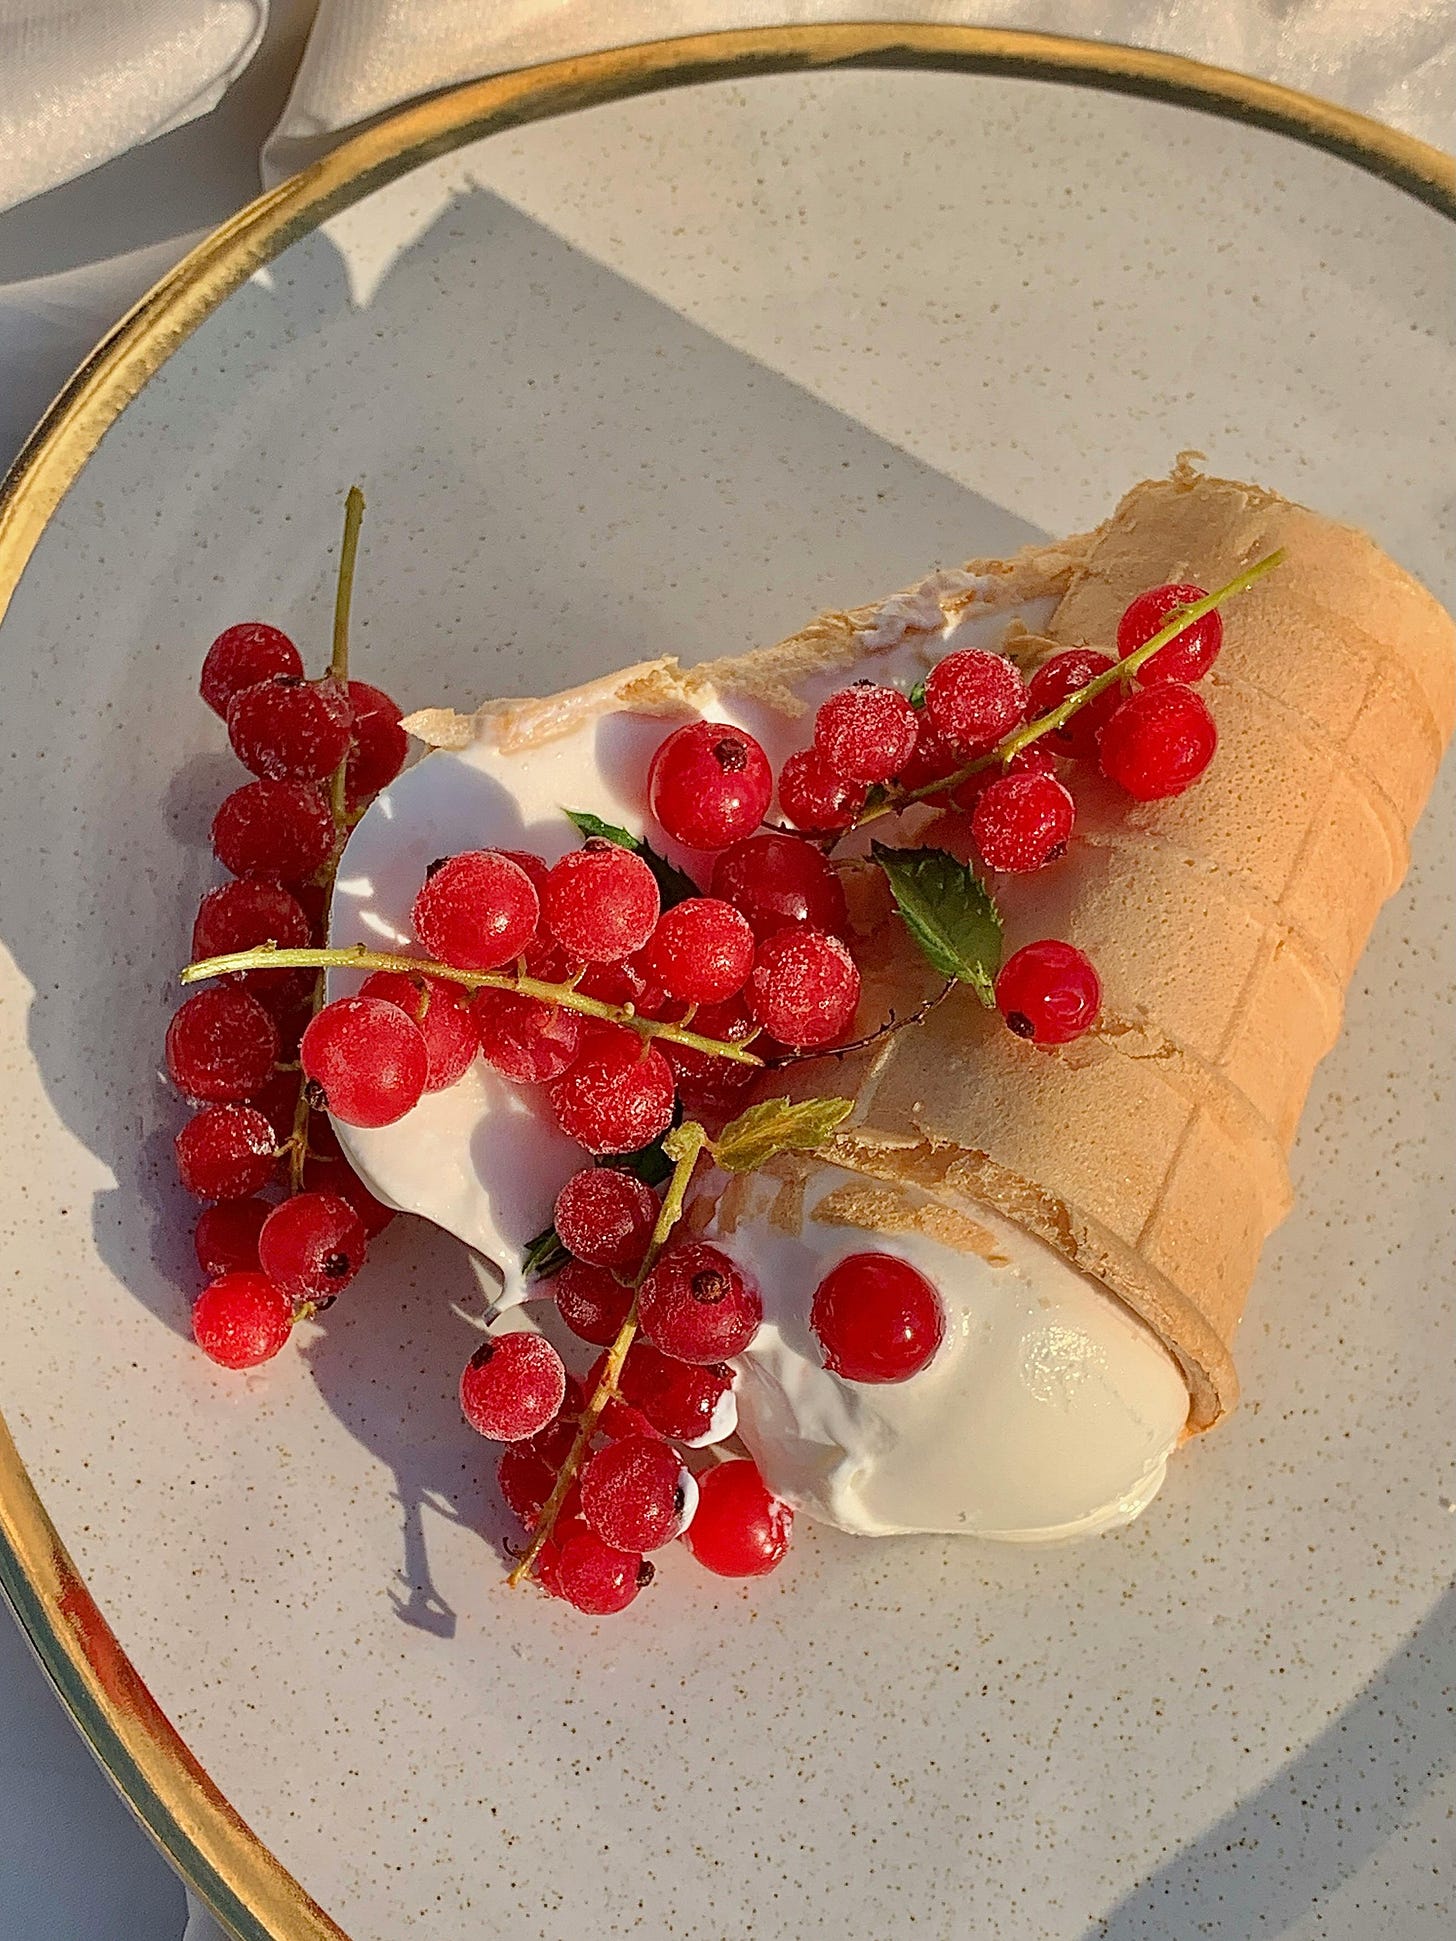 Vanilla ice cream cone broken in half on a plate with red currants on top